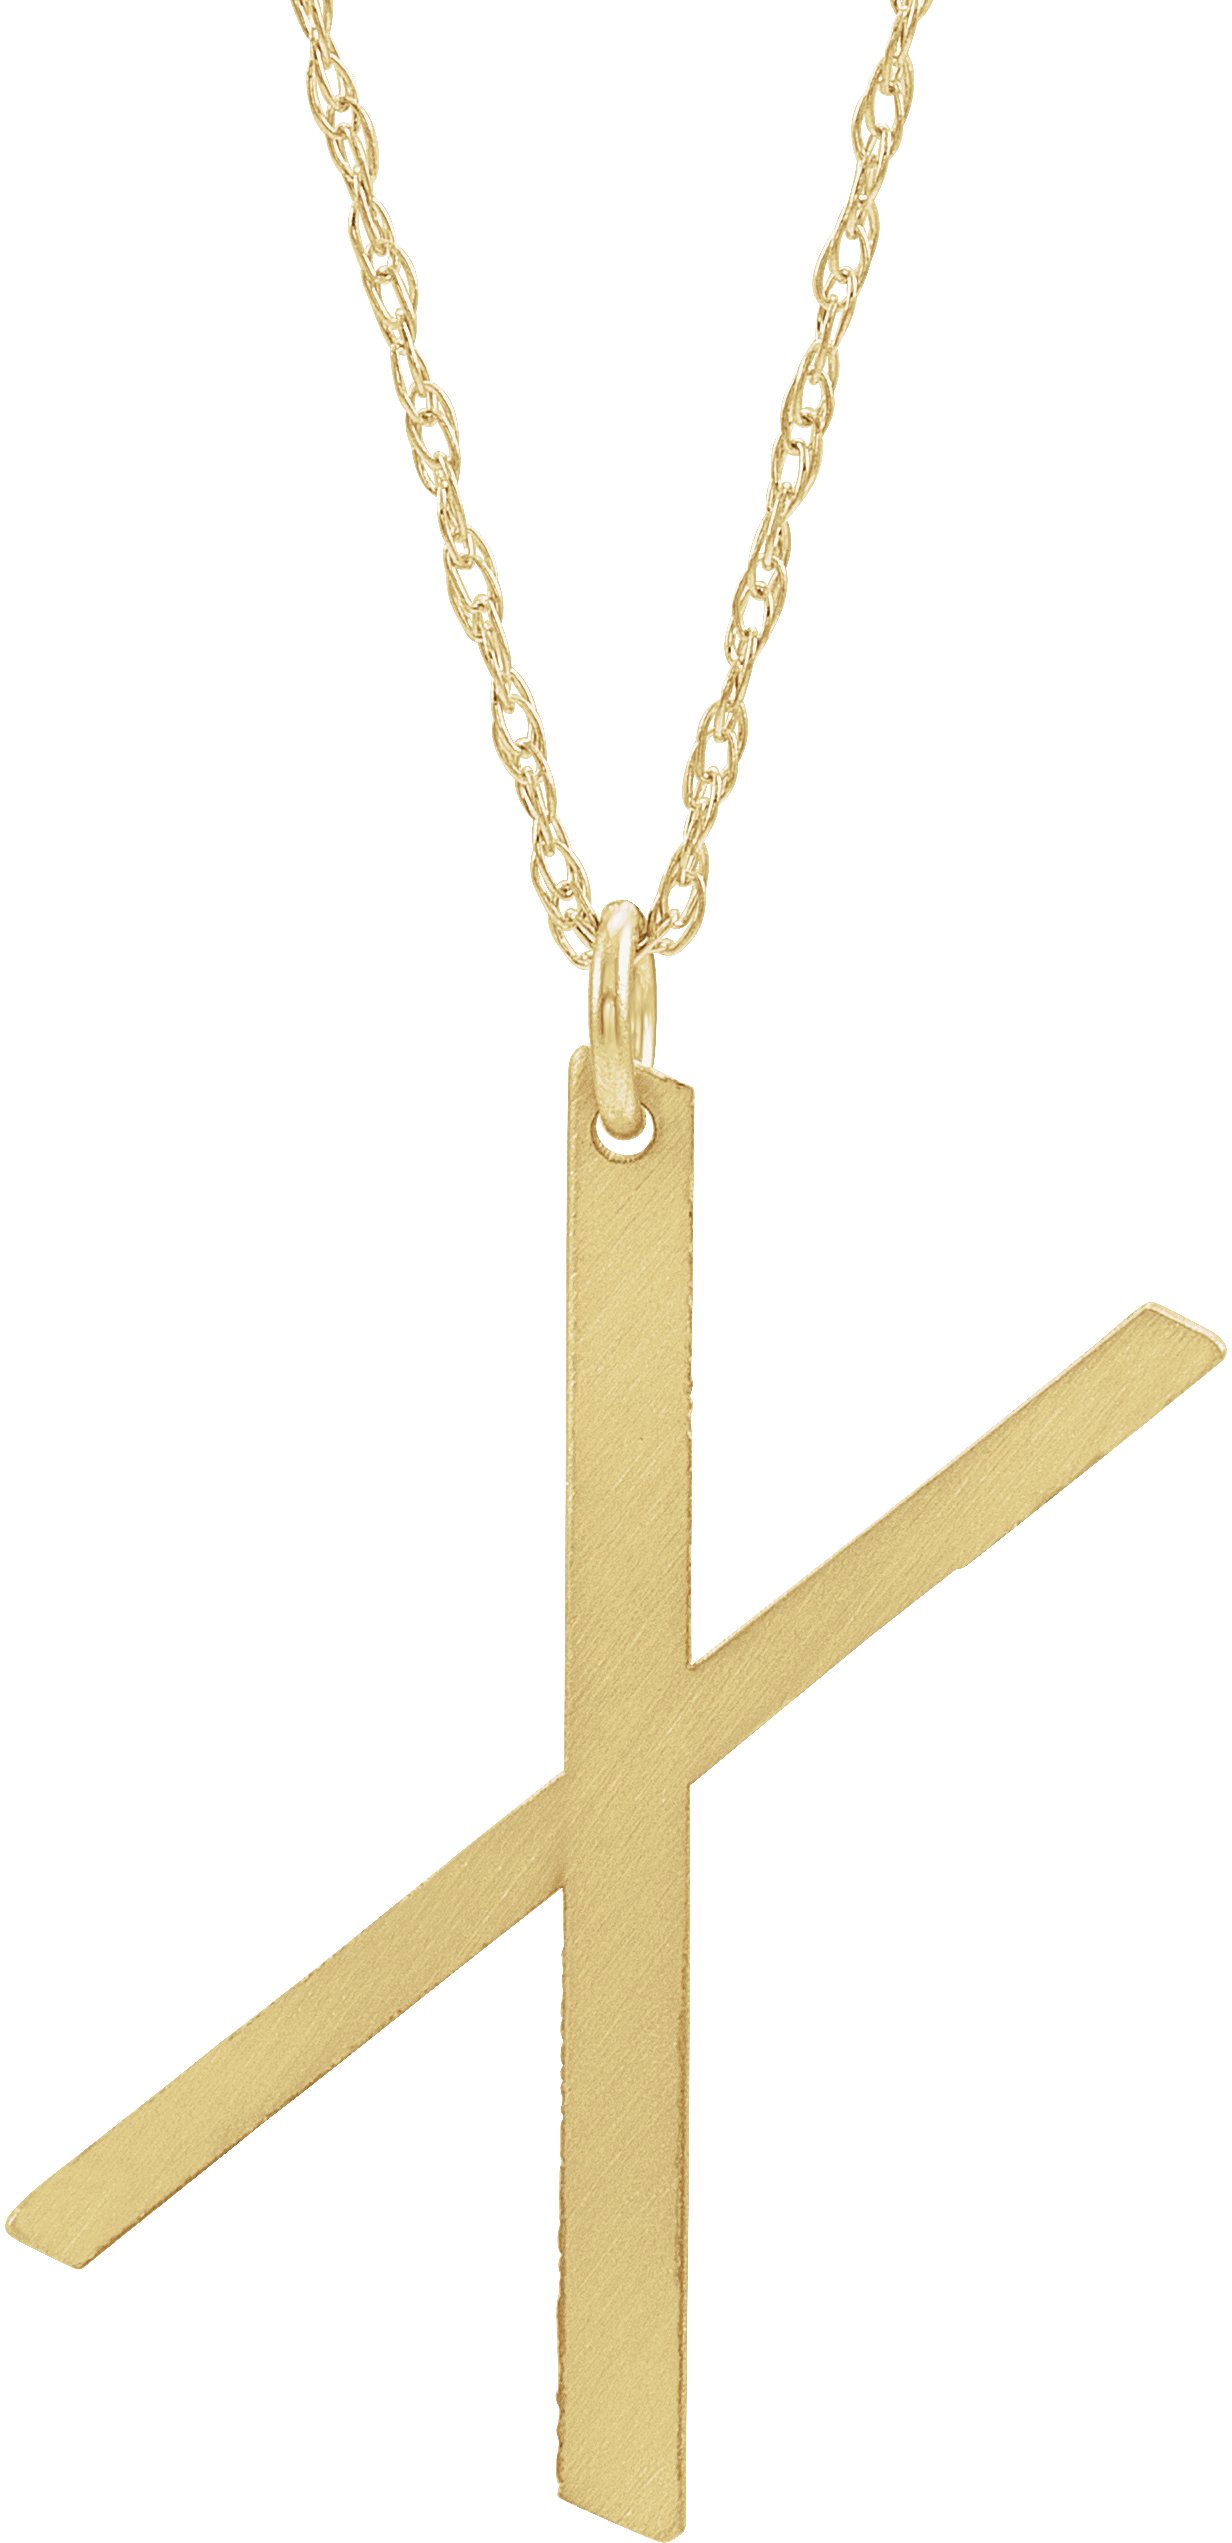 14K Yellow Block Initial X 16-18" Necklace with Brush Finish